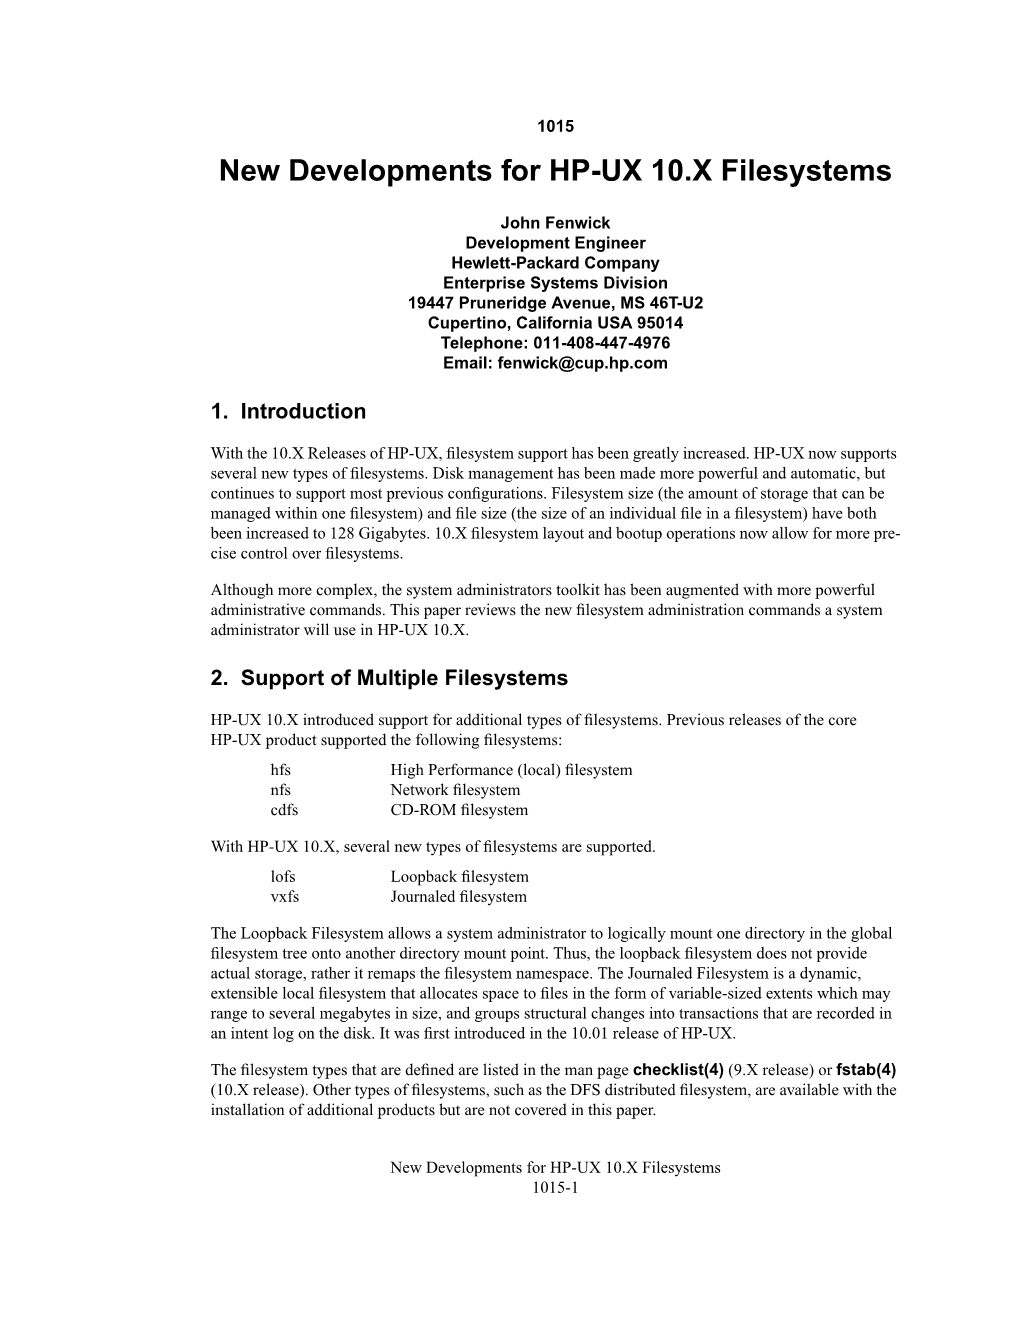 New Developments for HP-UX 10.X Filesystems